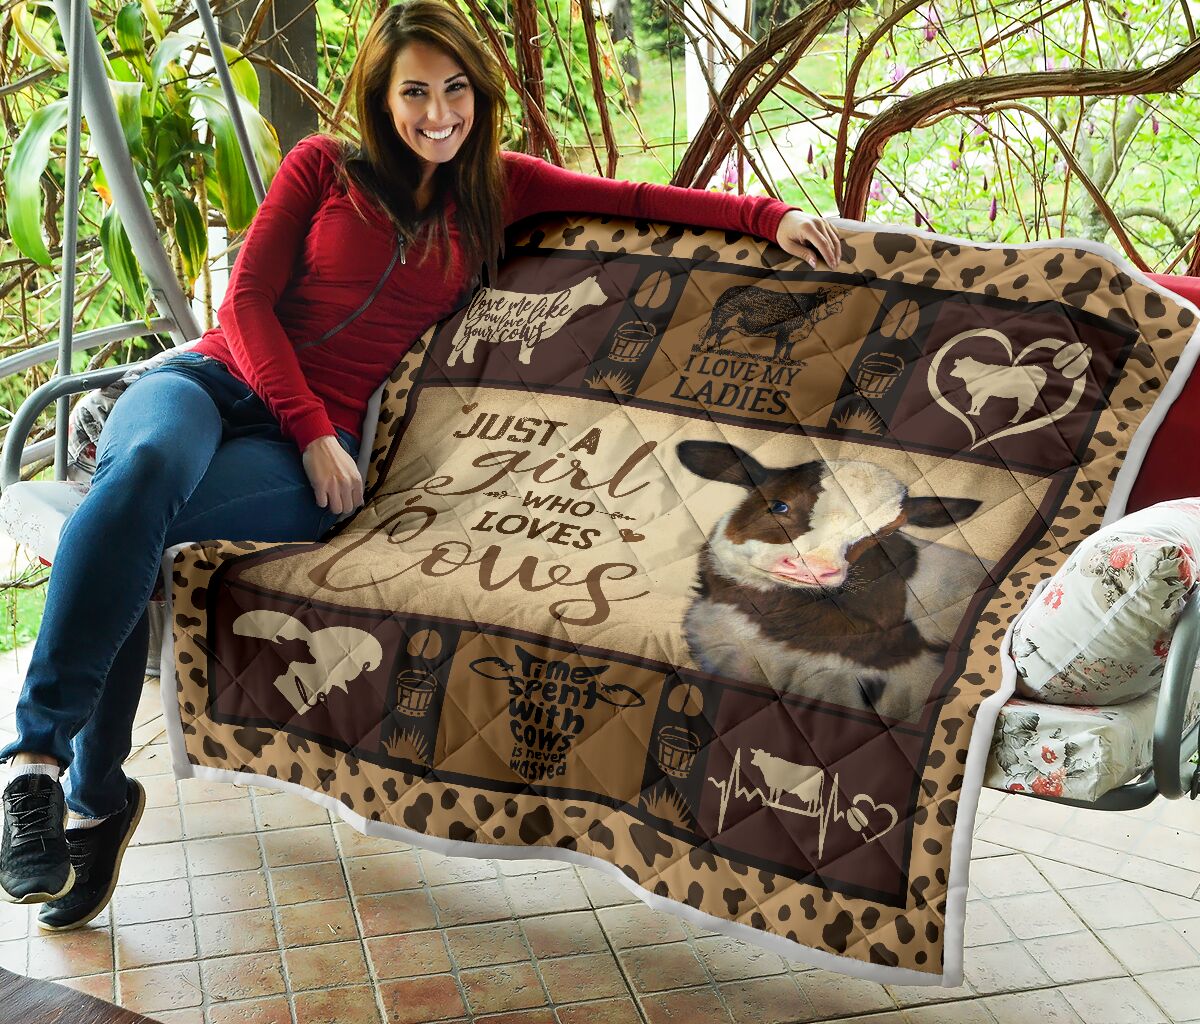 Farm just a girl who loves cows quilt 2